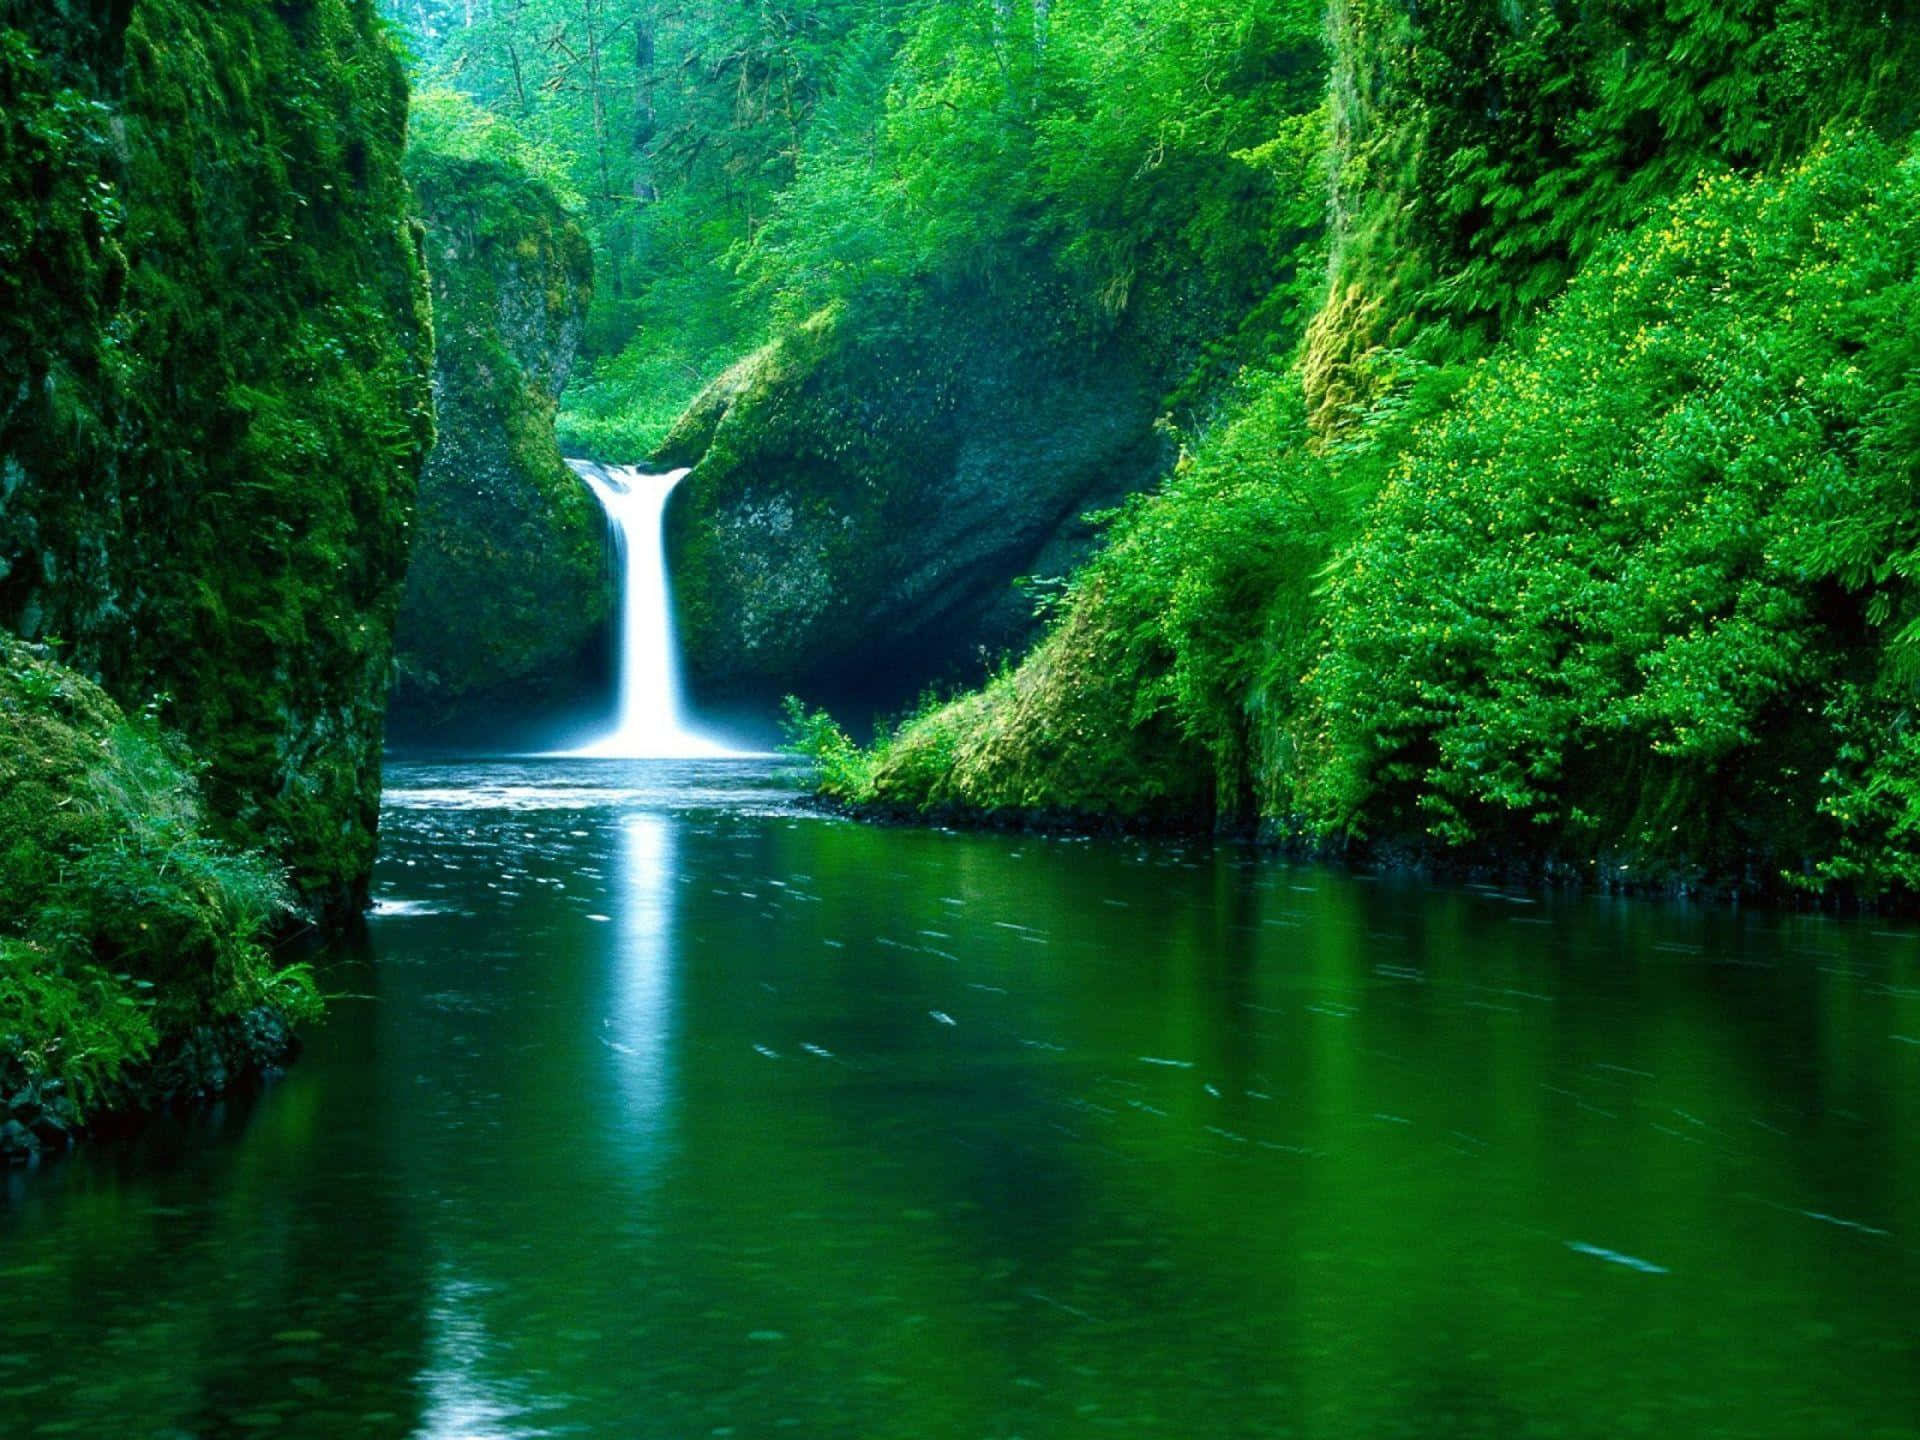 Lush green wilderness of the forest Wallpaper